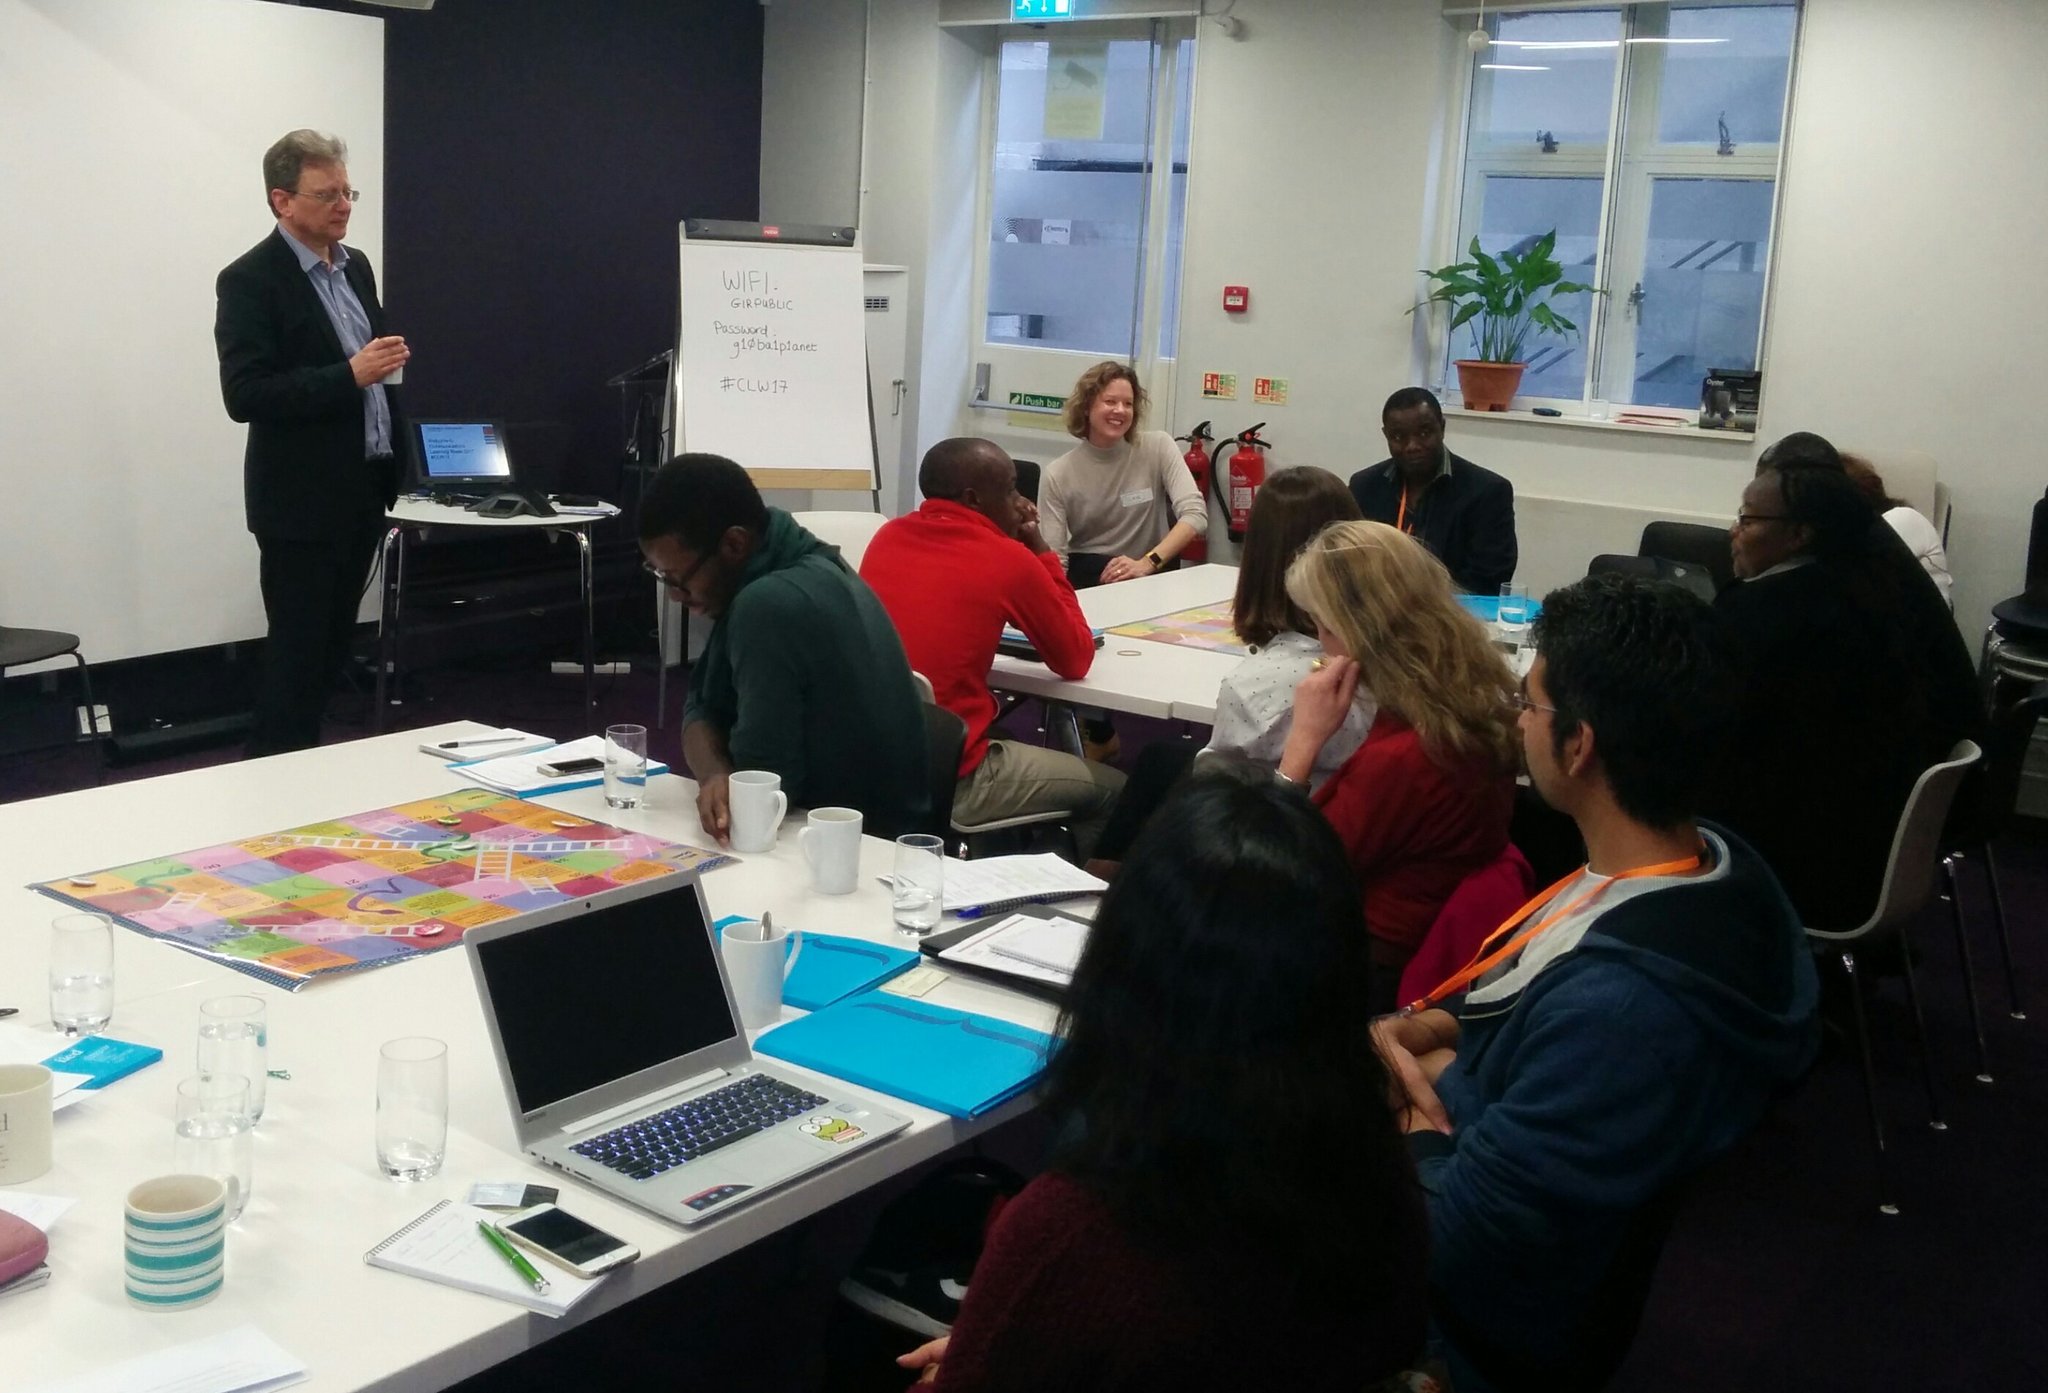 IIED director @andynortondev drops into to #CLW17 to chat to participants and hear what they want to learn/share during the week https://t.co/1OJF8bJScw